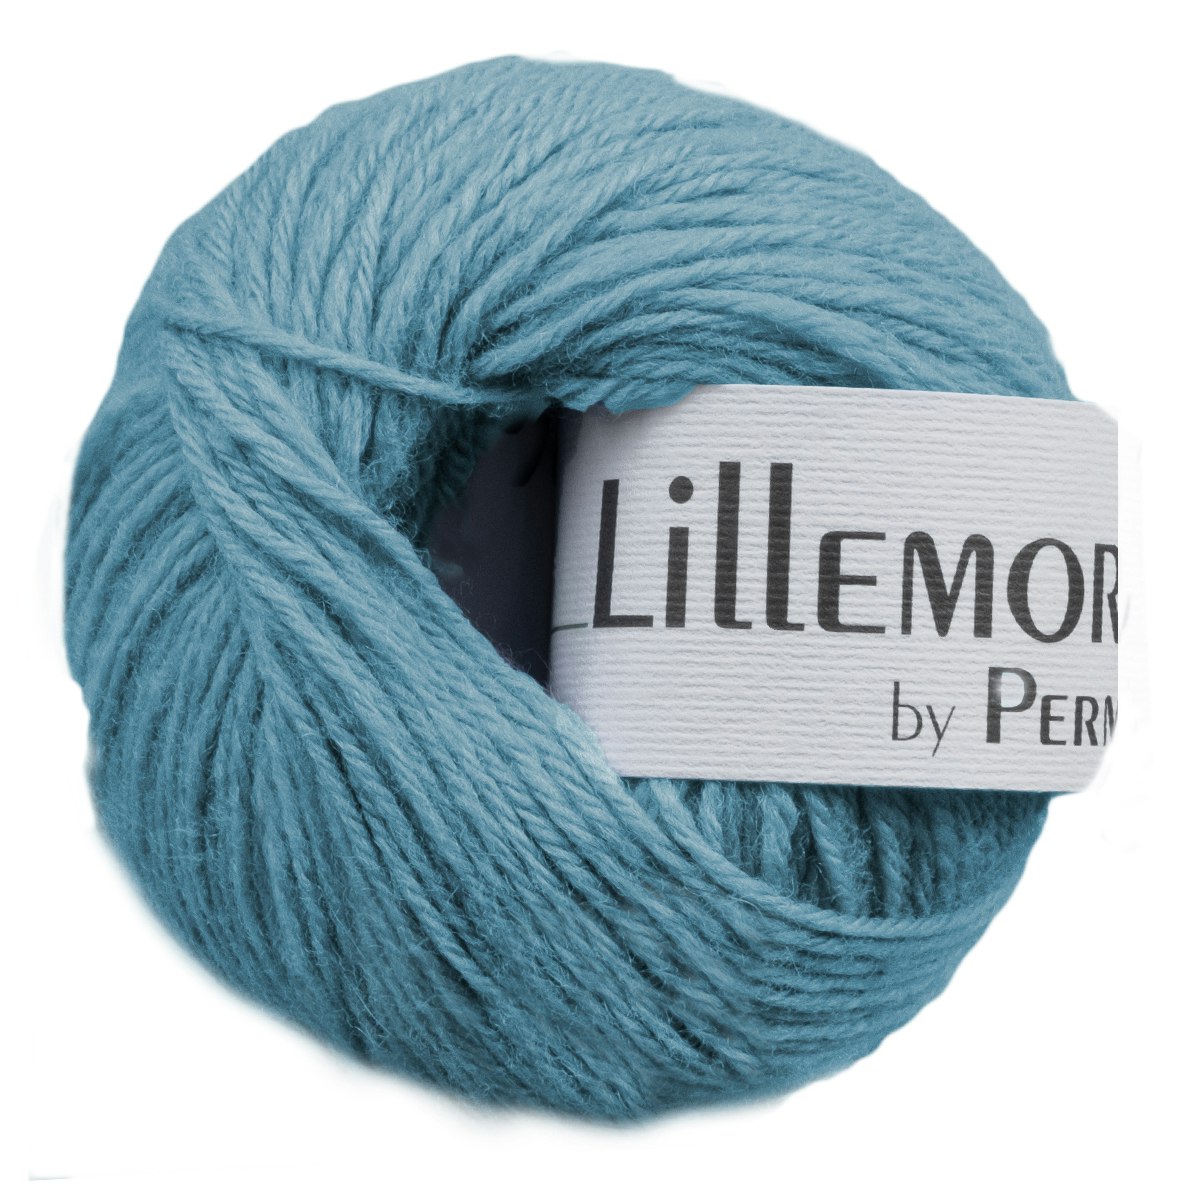 Lillemor by permin